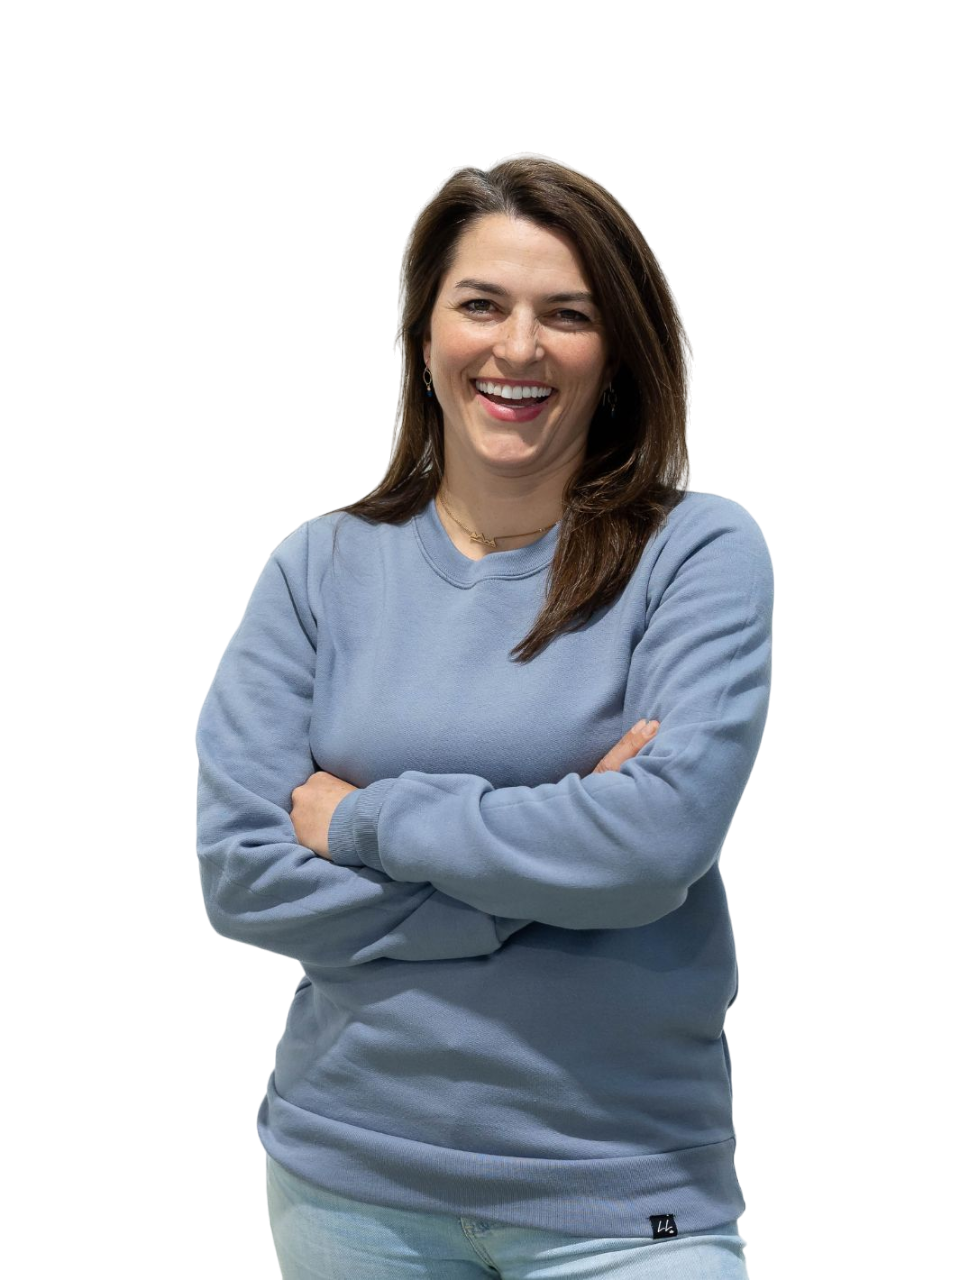 Smiling individual in a soft, comfortable, high-quality Edworthy Fleece sweater, a Canadian-made, powder-blue sweater